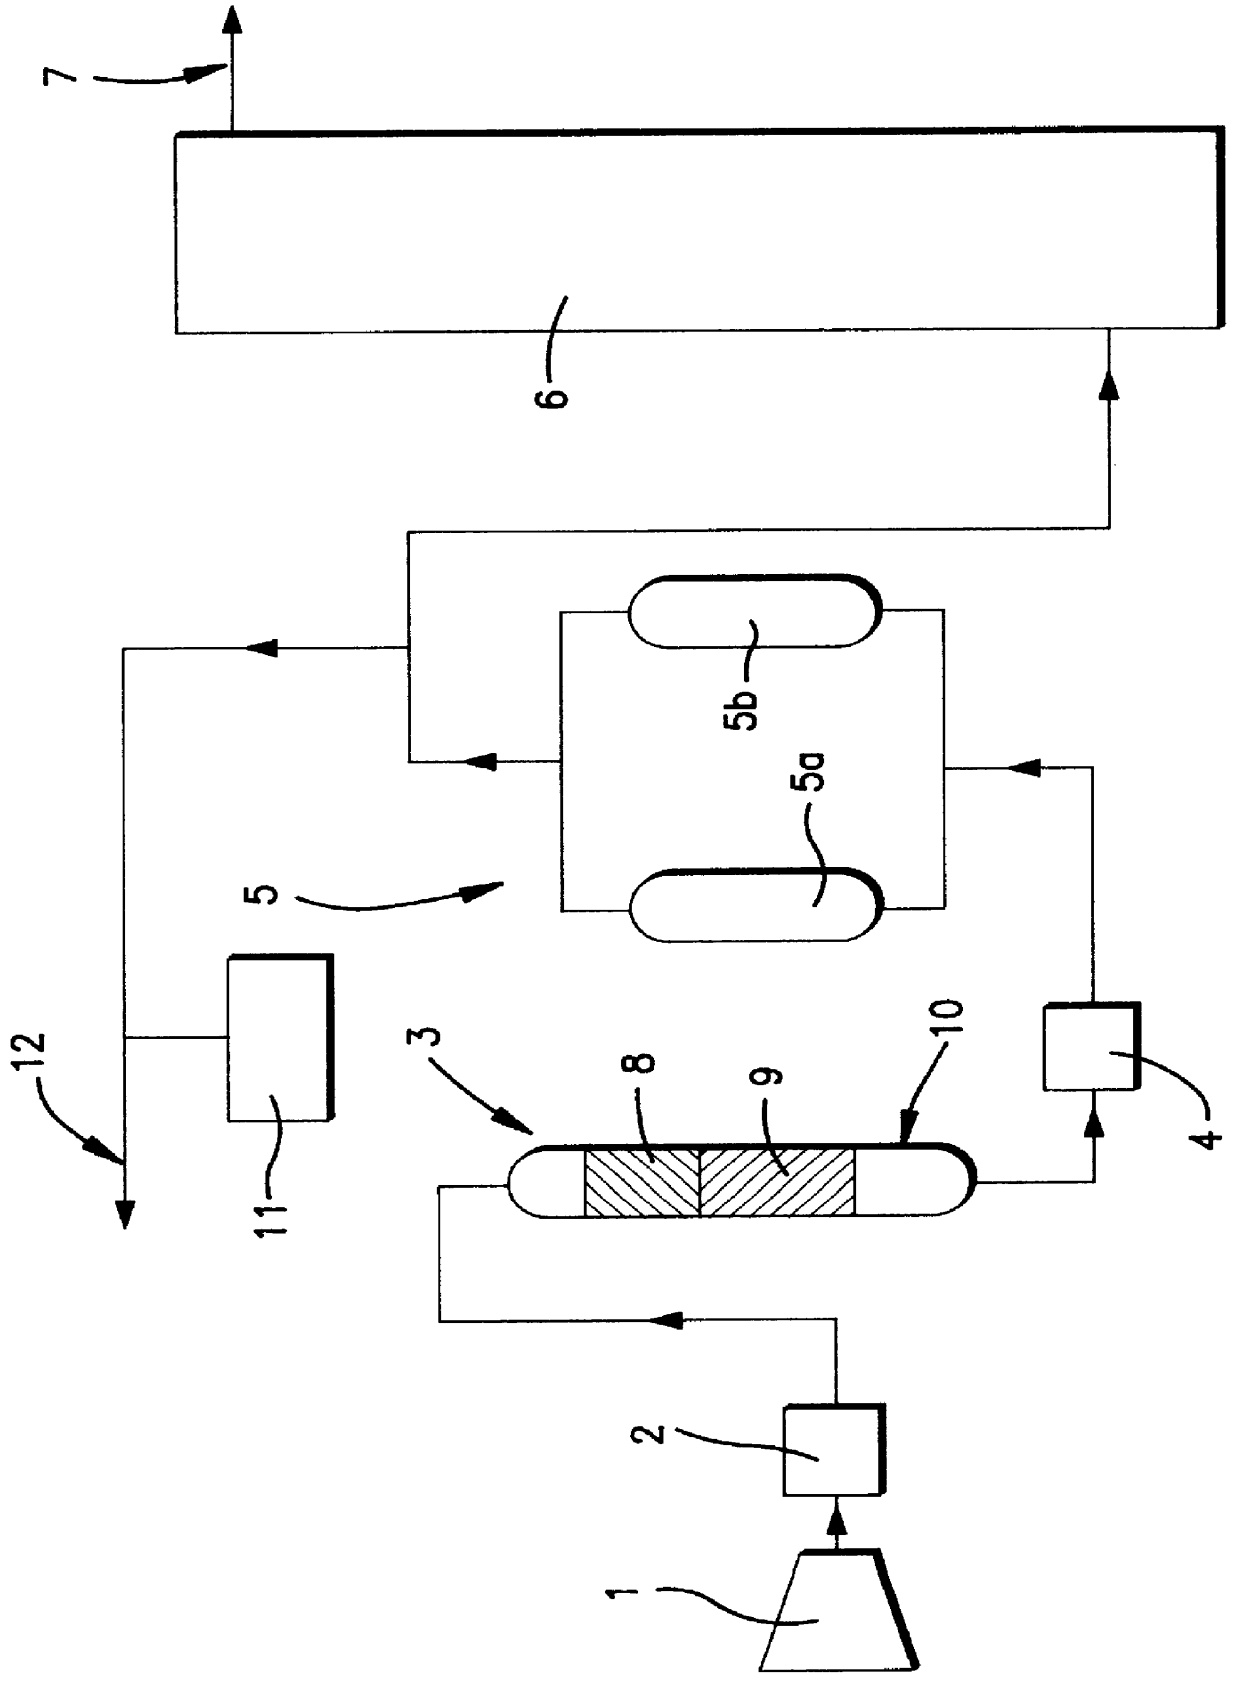 Process and device for treating gas flows